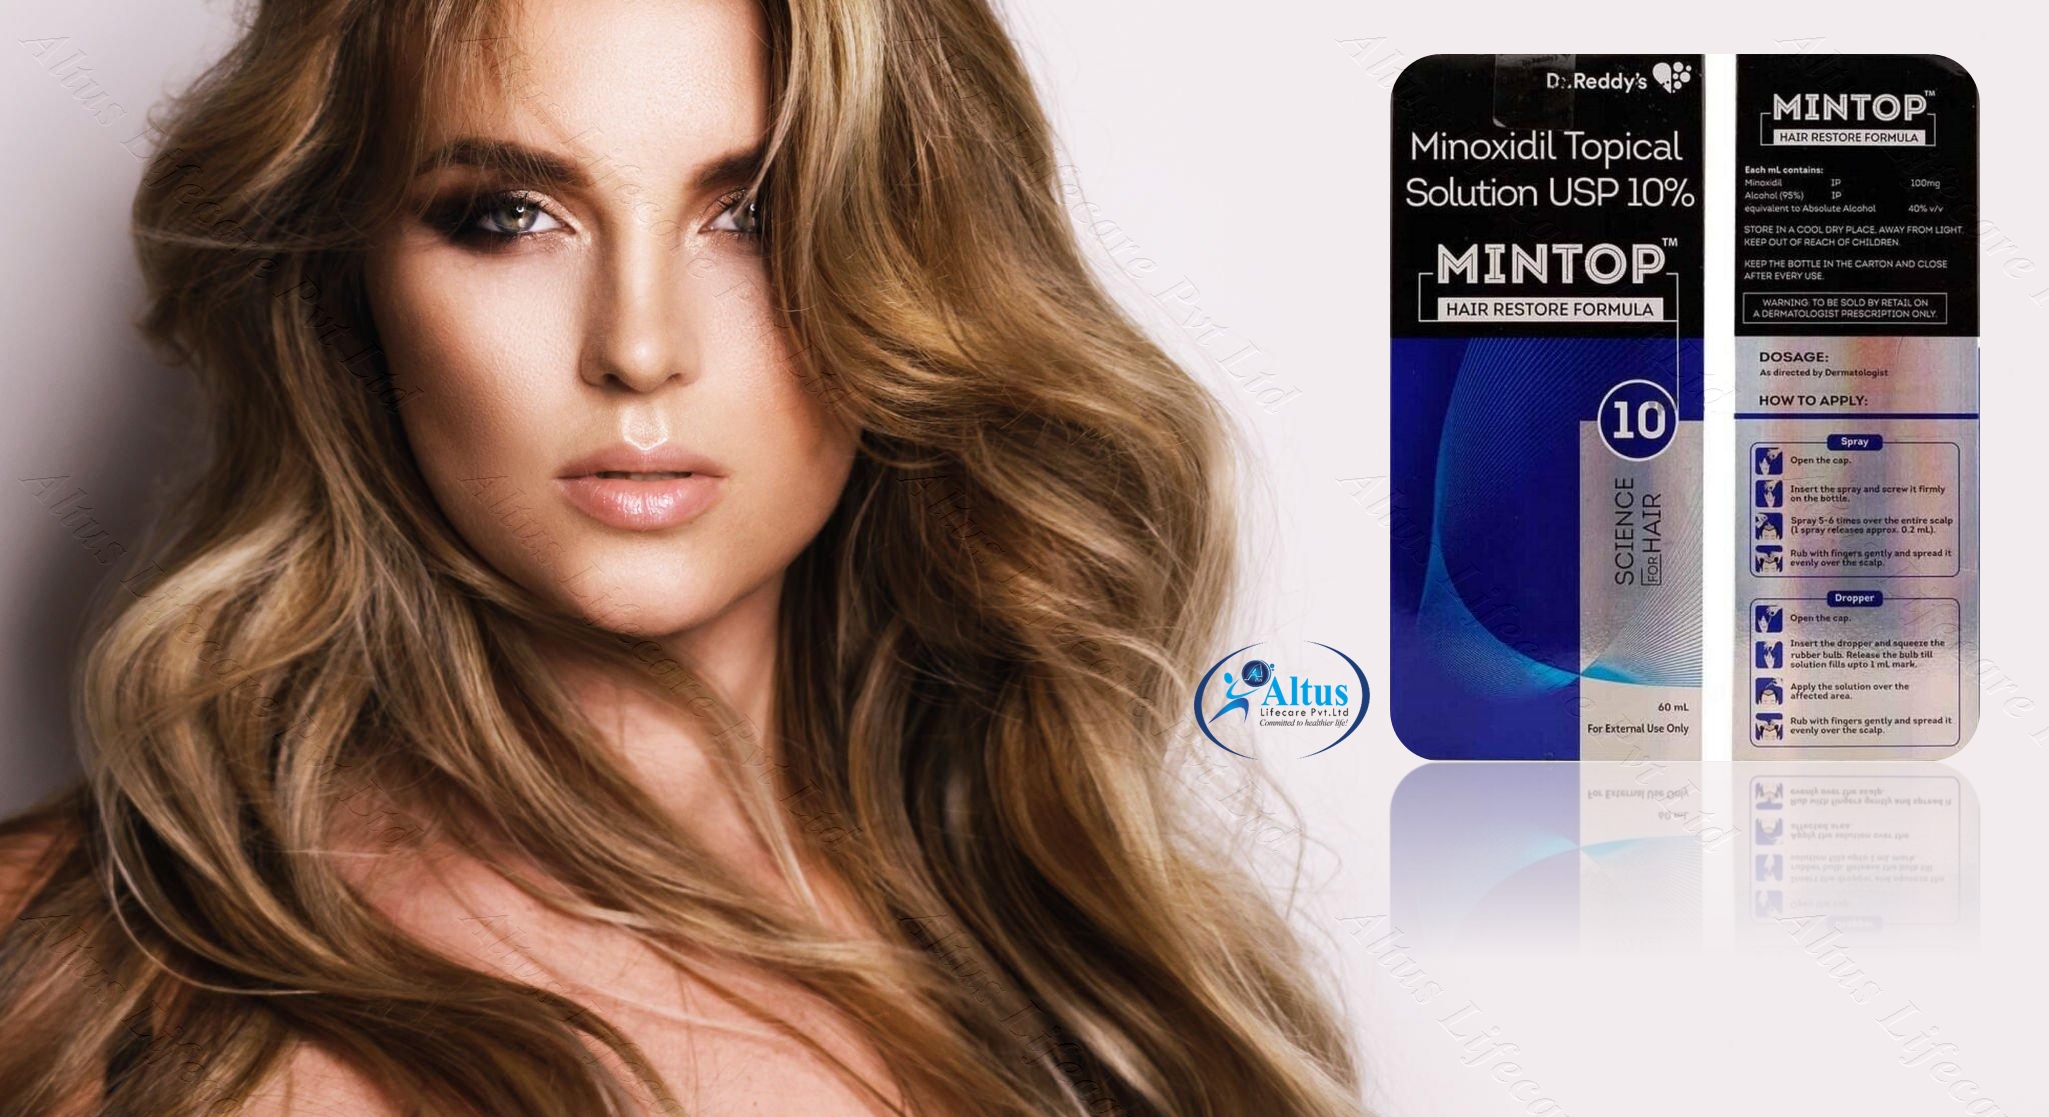 Mintop 5 Solution Magic: The Revolutionary Solution to Hair Loss Revealed!